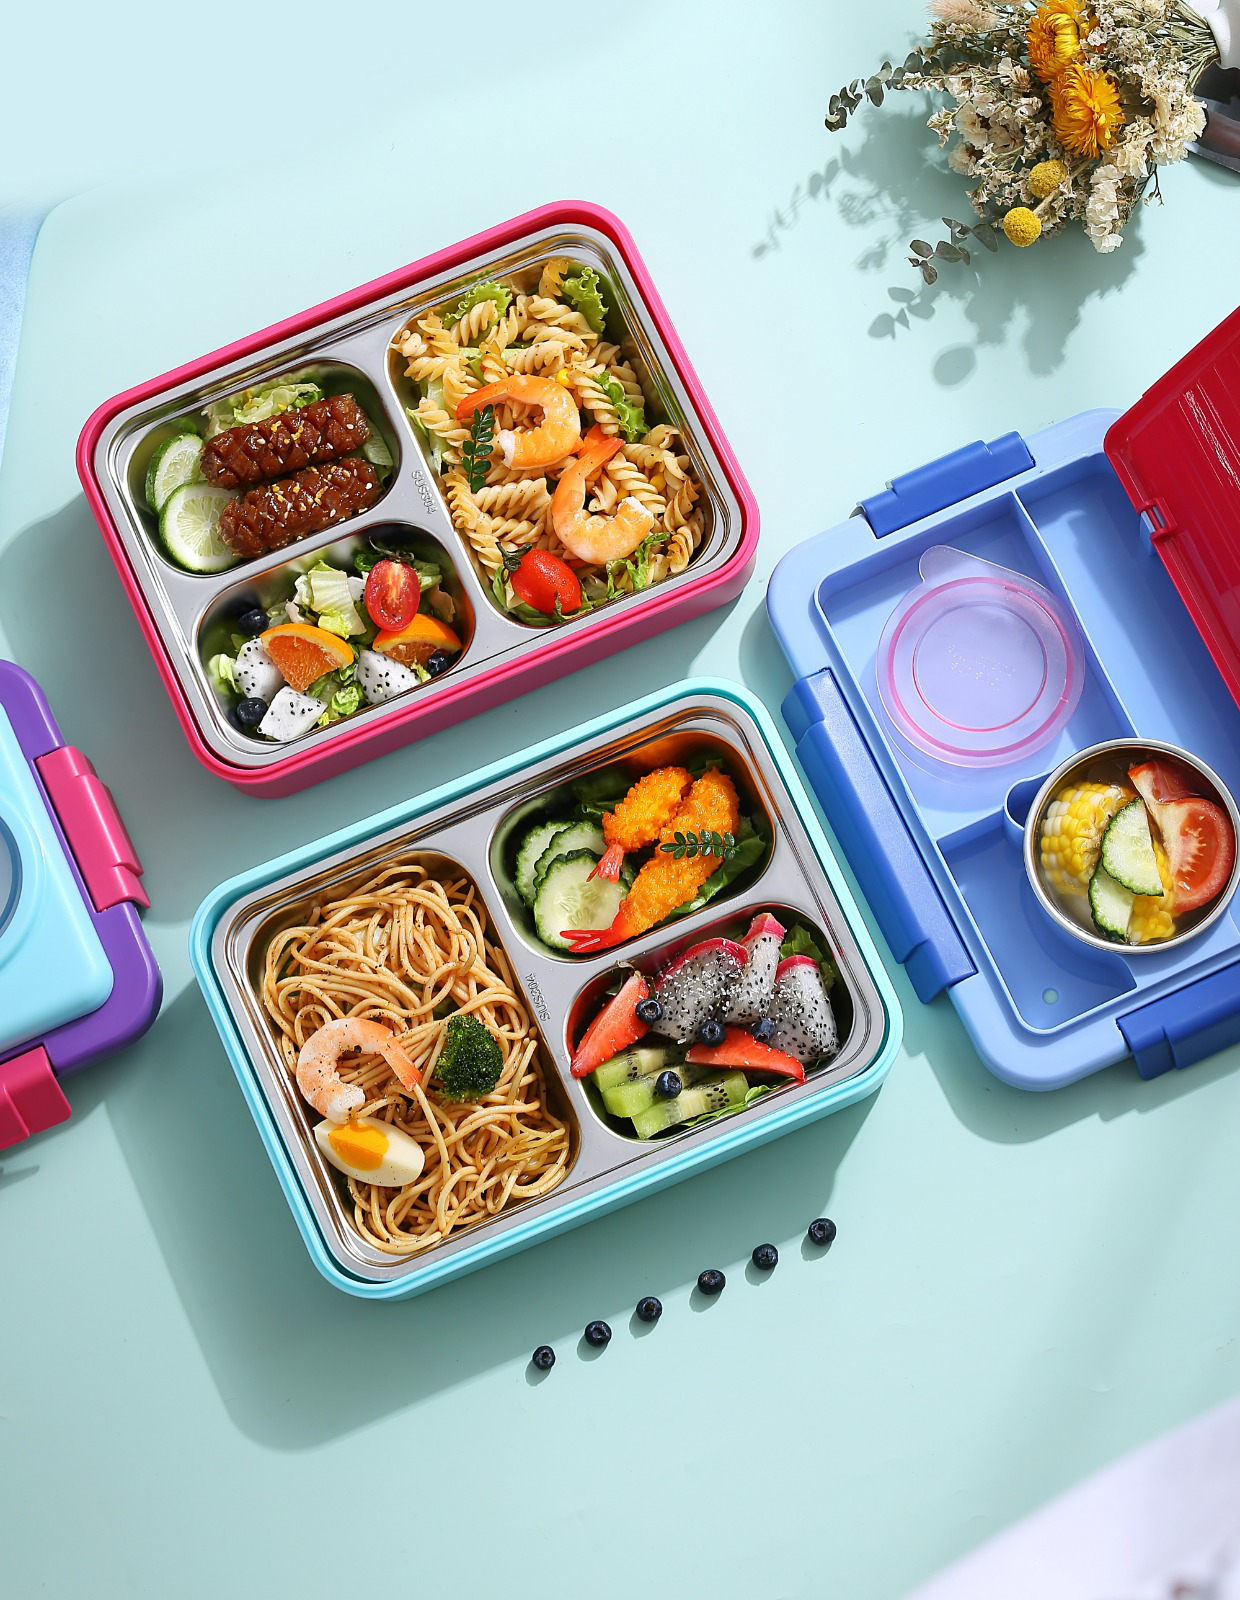 ANSTONIA® 7 Compartments Stainless Steel (SS304) Lunch Box for Kids/Adults with Spoon 7 Containers Lunch Box